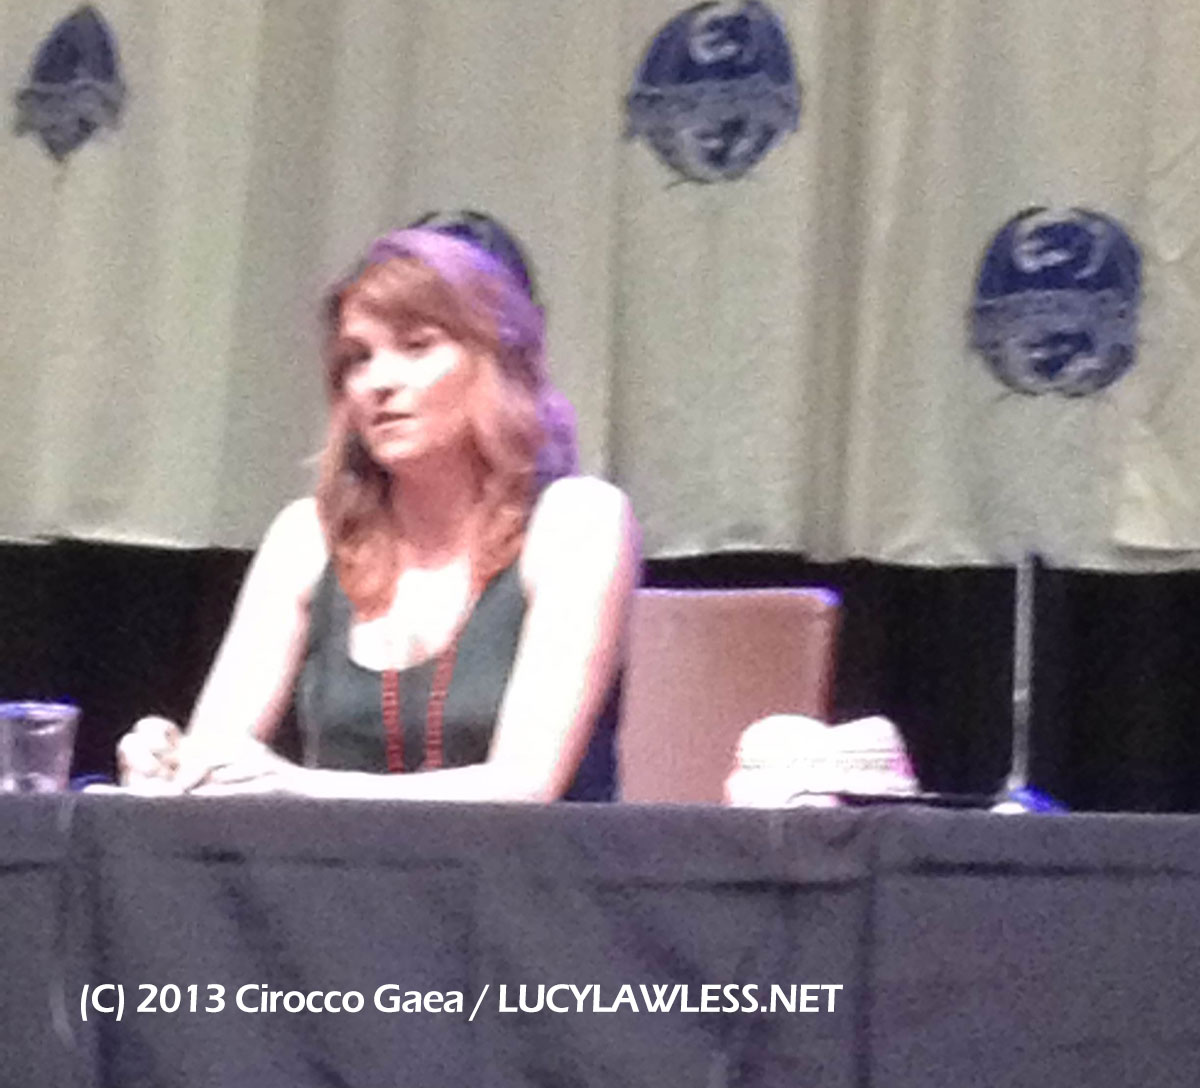 gal/Friday/Spotlight_on_Lucy_Lawless/Photos_by_Cirocco/photo2.jpg